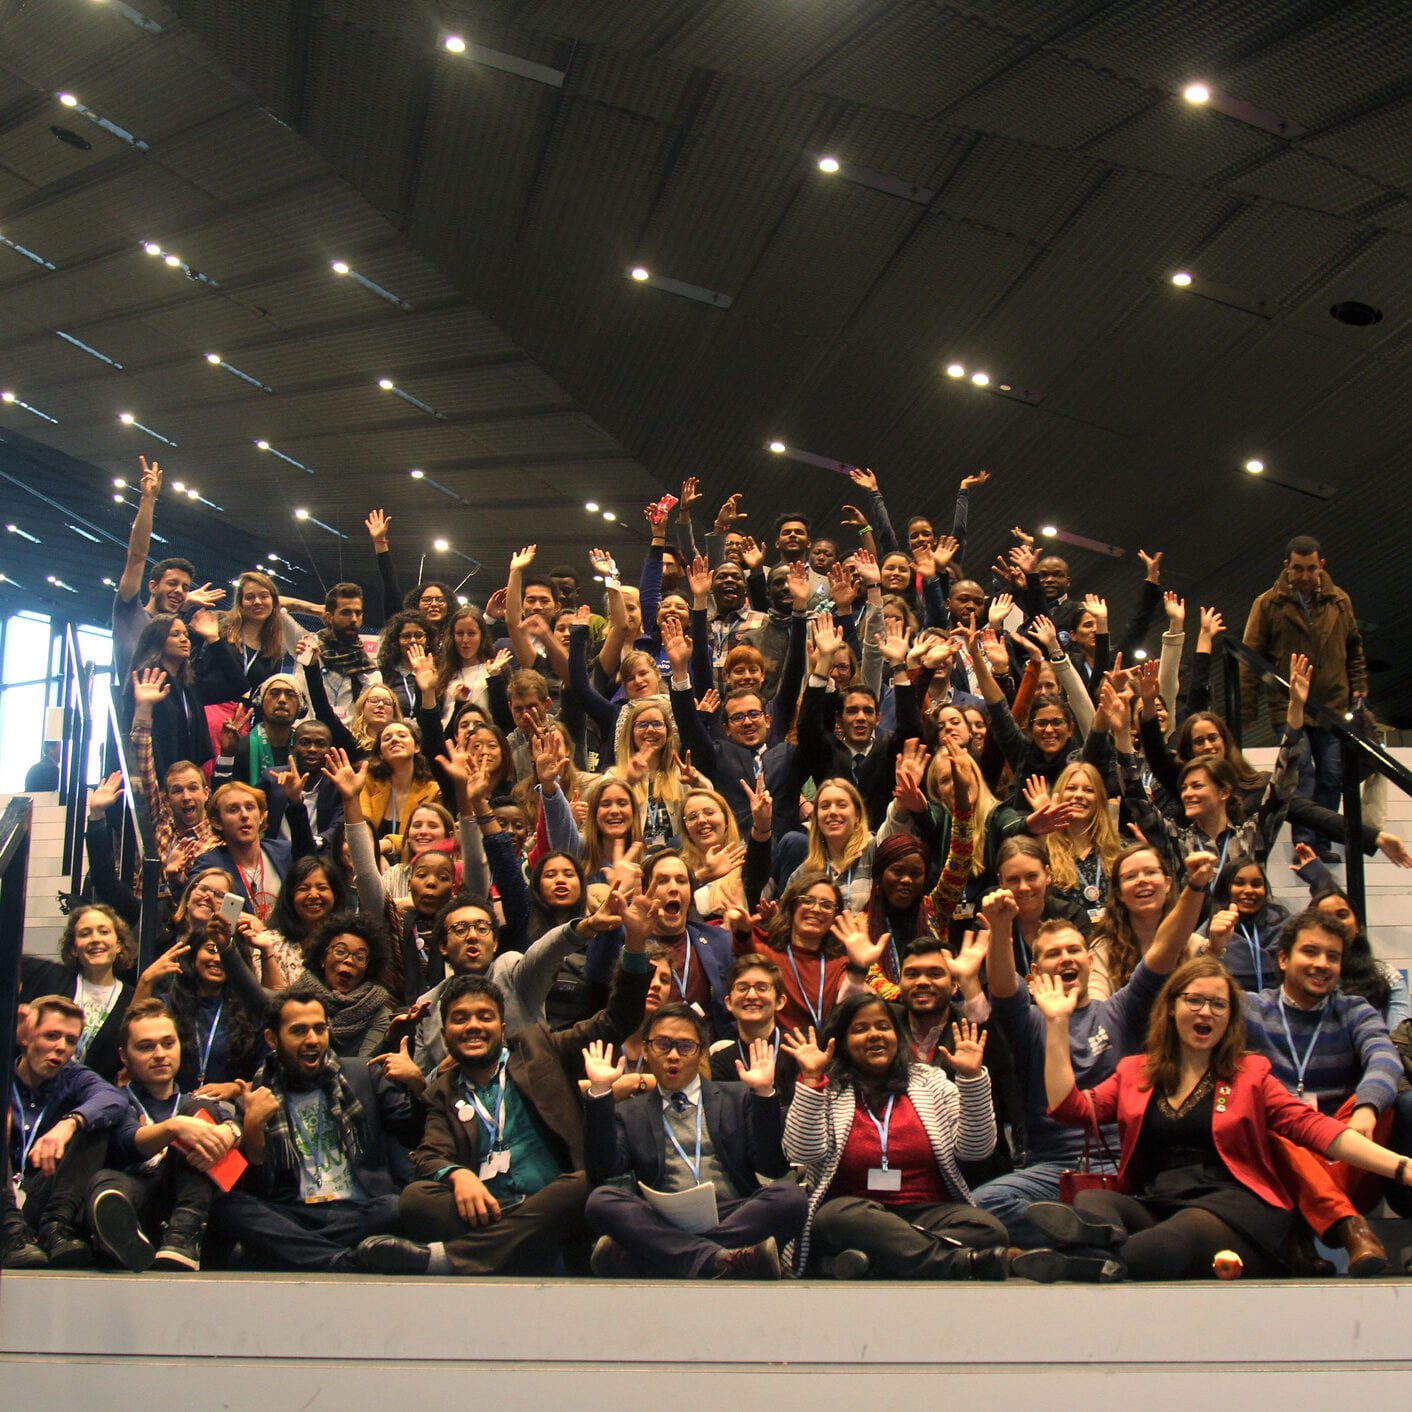 Robin Fontaine’s Reflections on COY16 and the Global Youth Statement